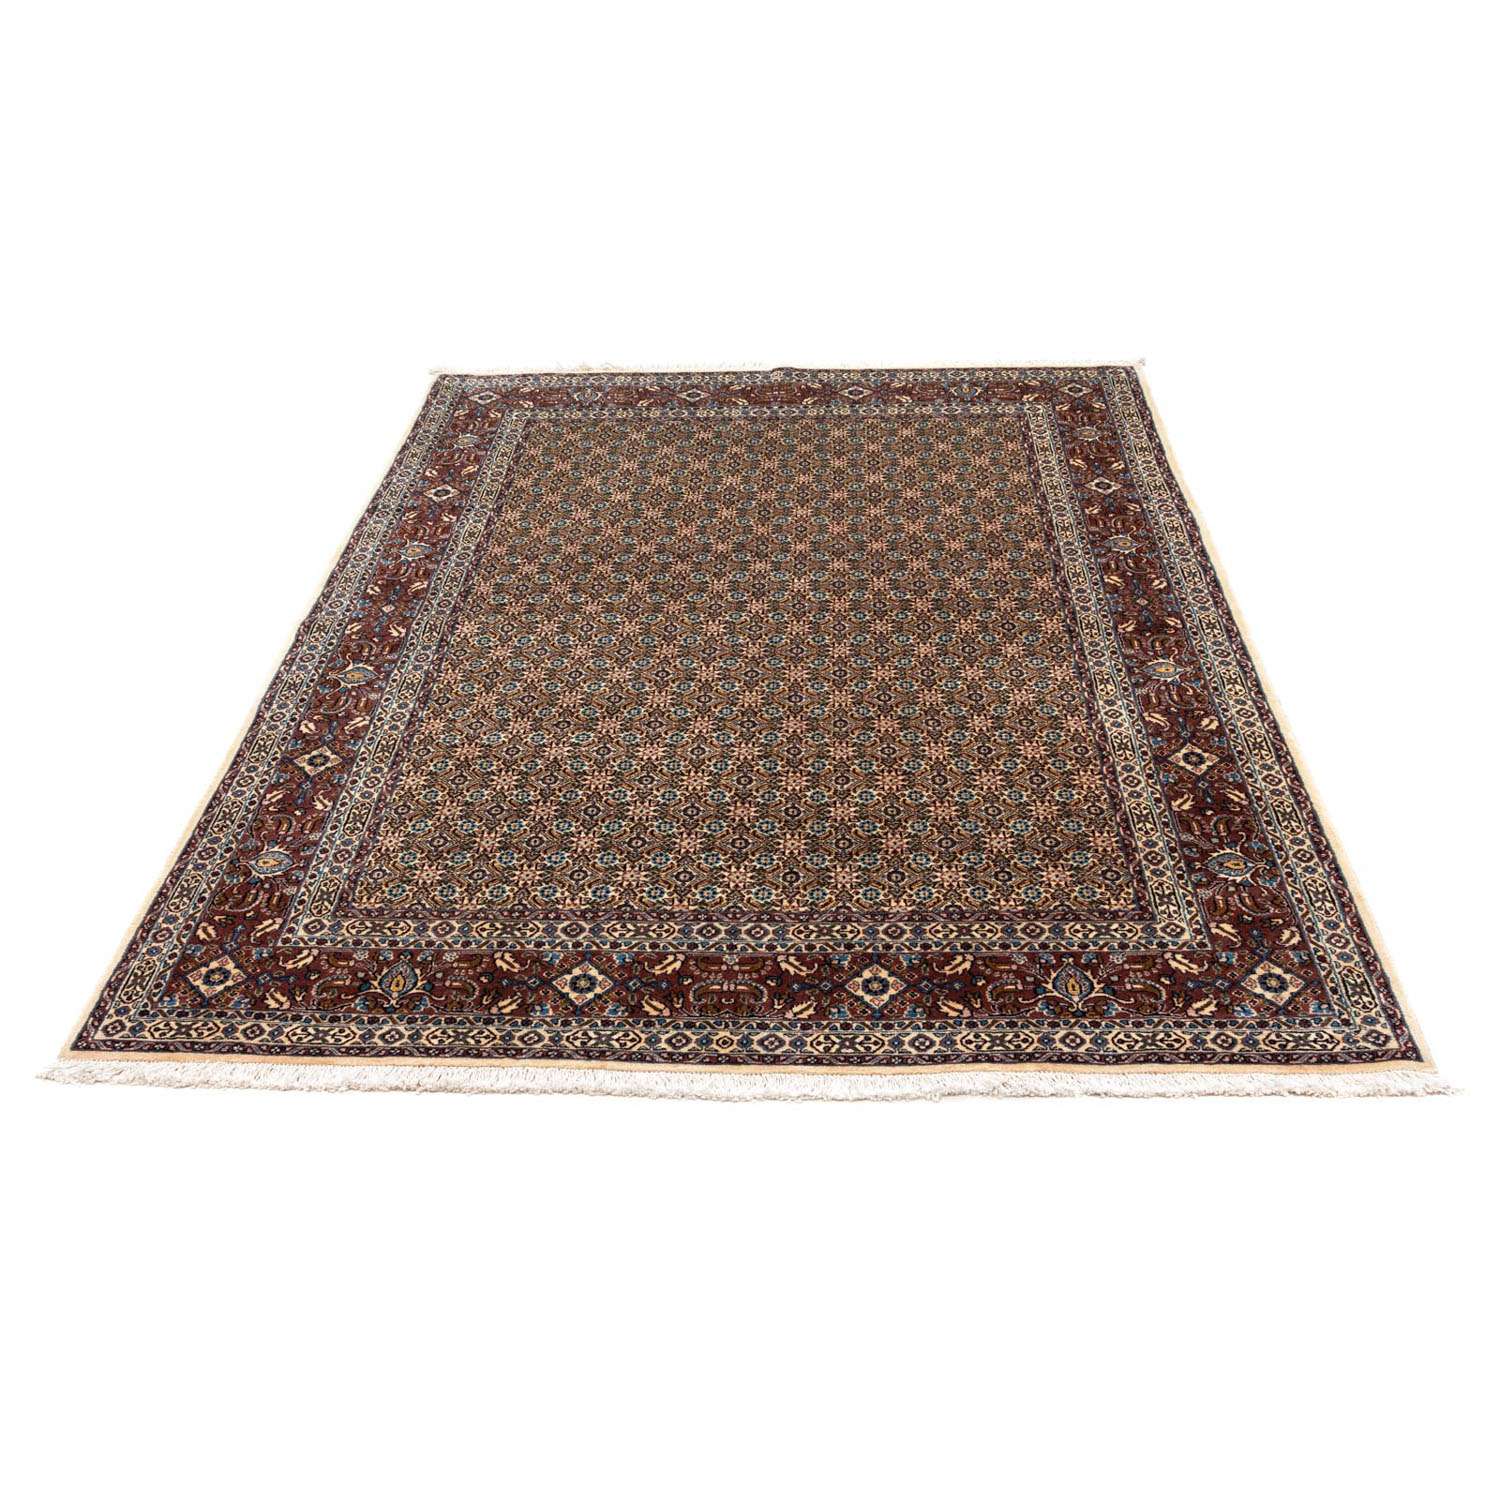 Perser Rug - Classic - 232 x 165 cm - brown